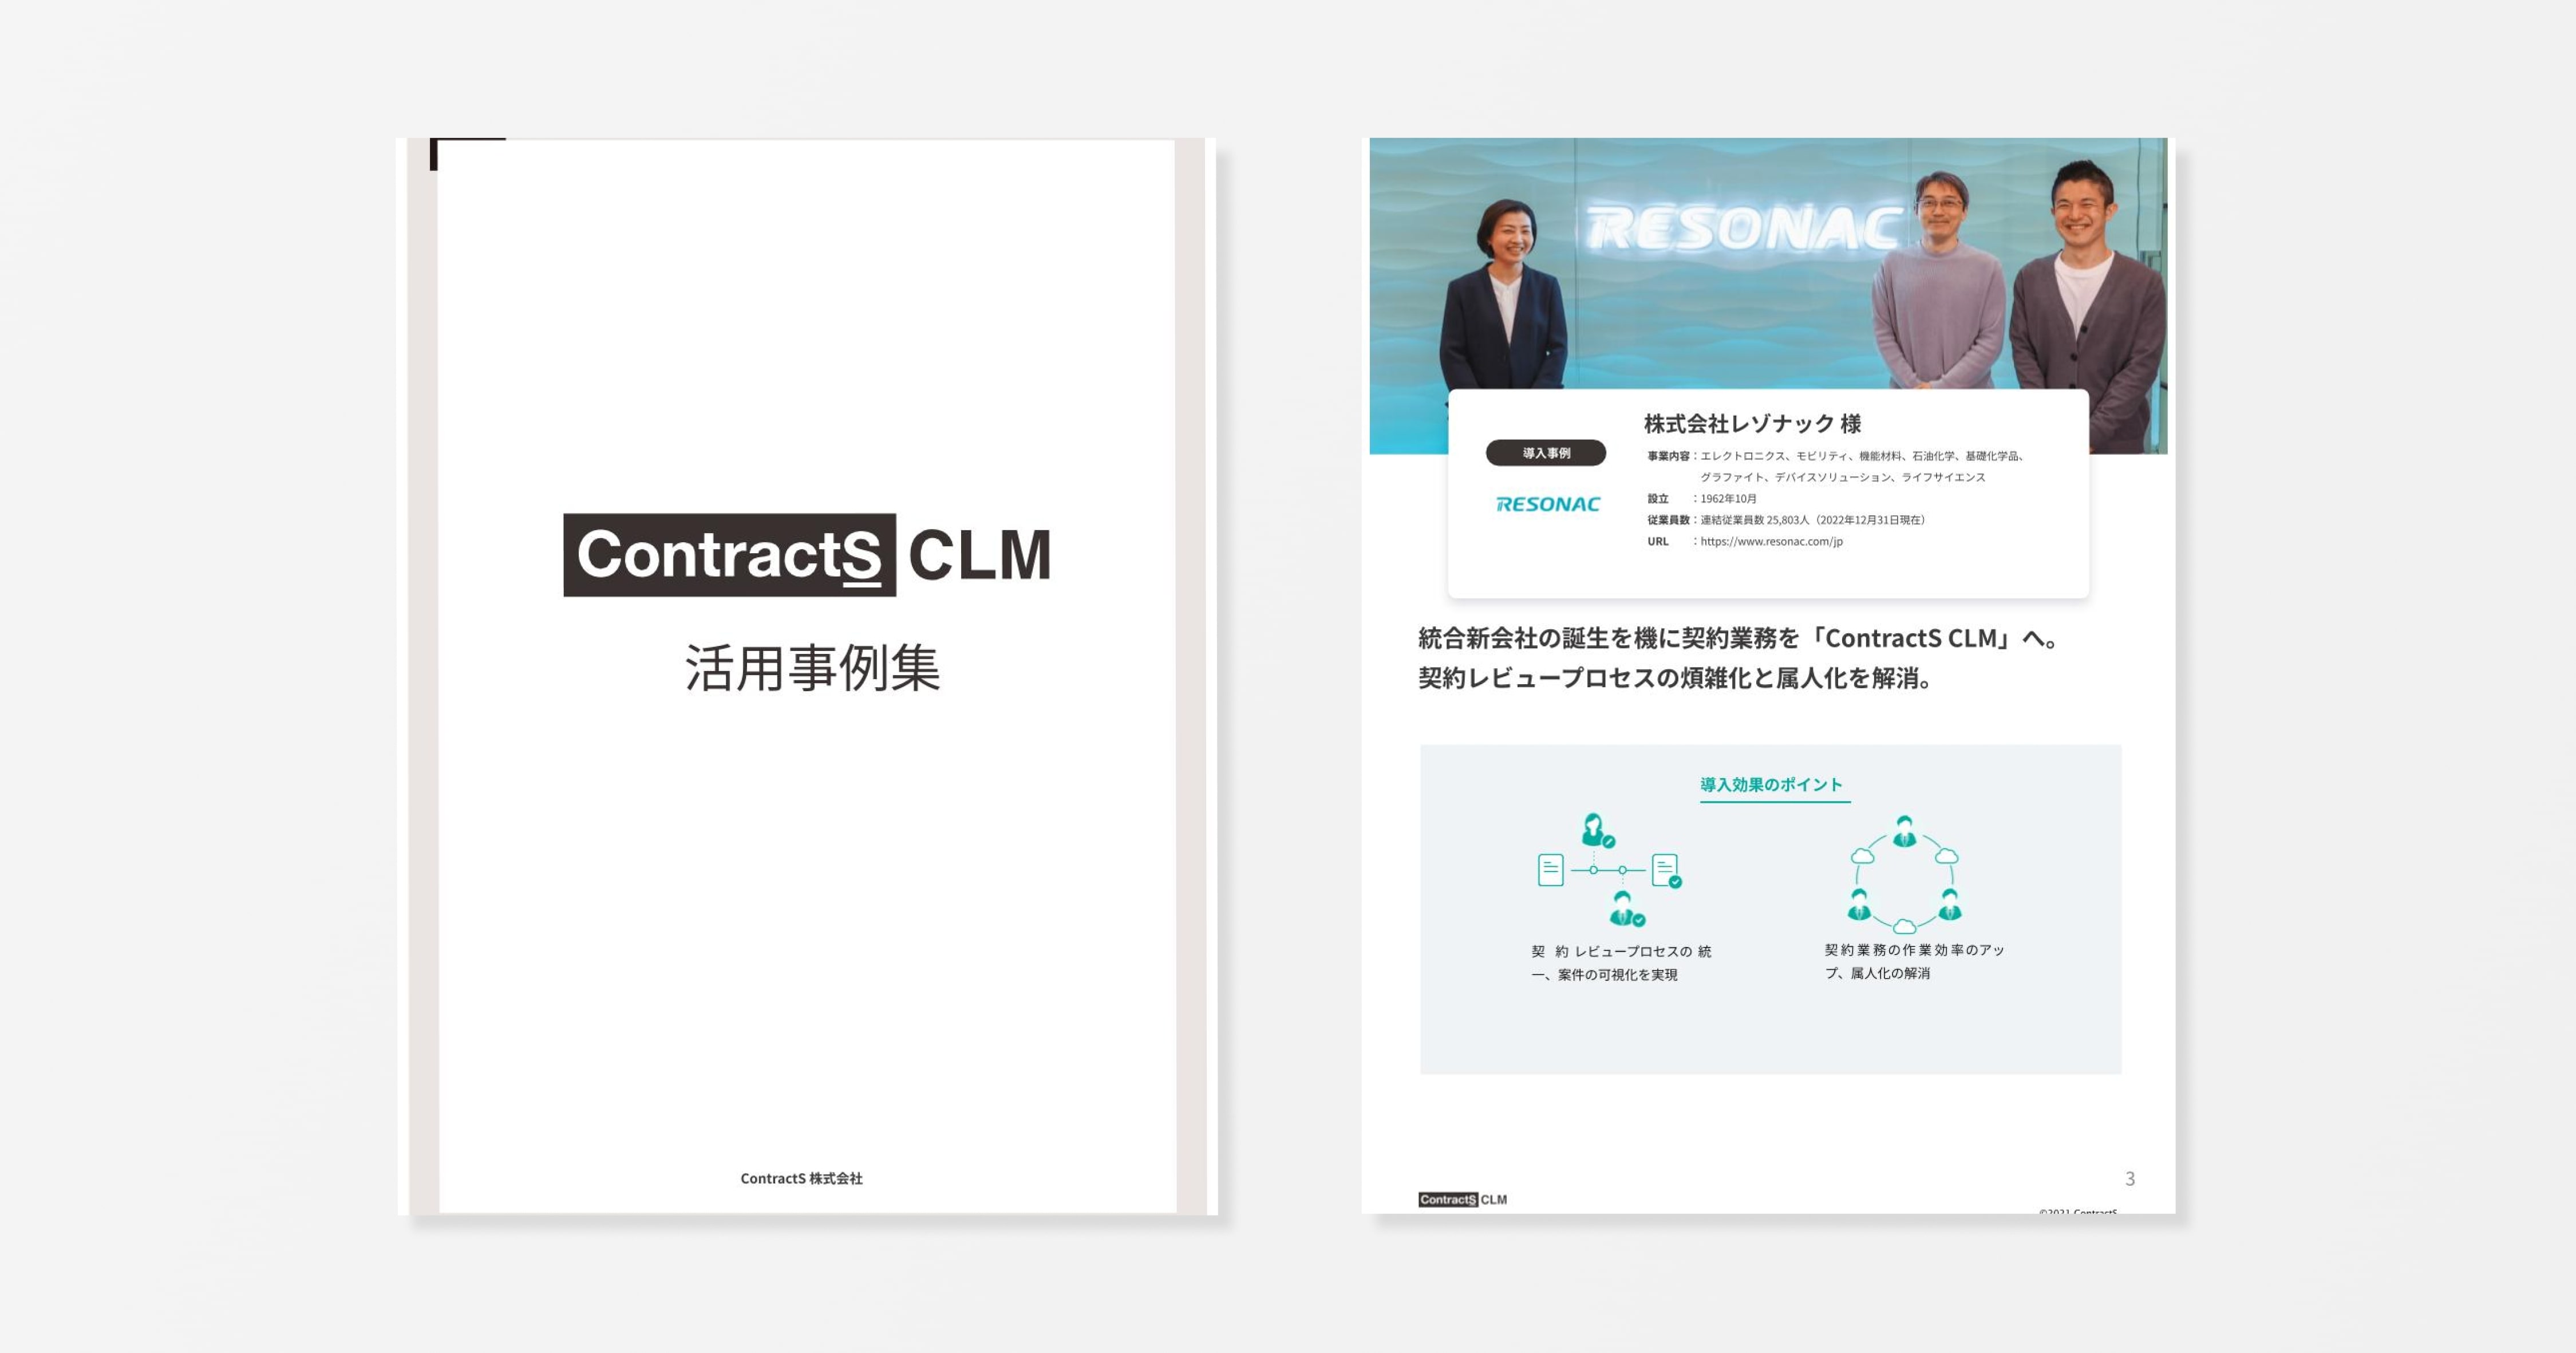 ContractS CLM(コントラクツCLM)活用事例集